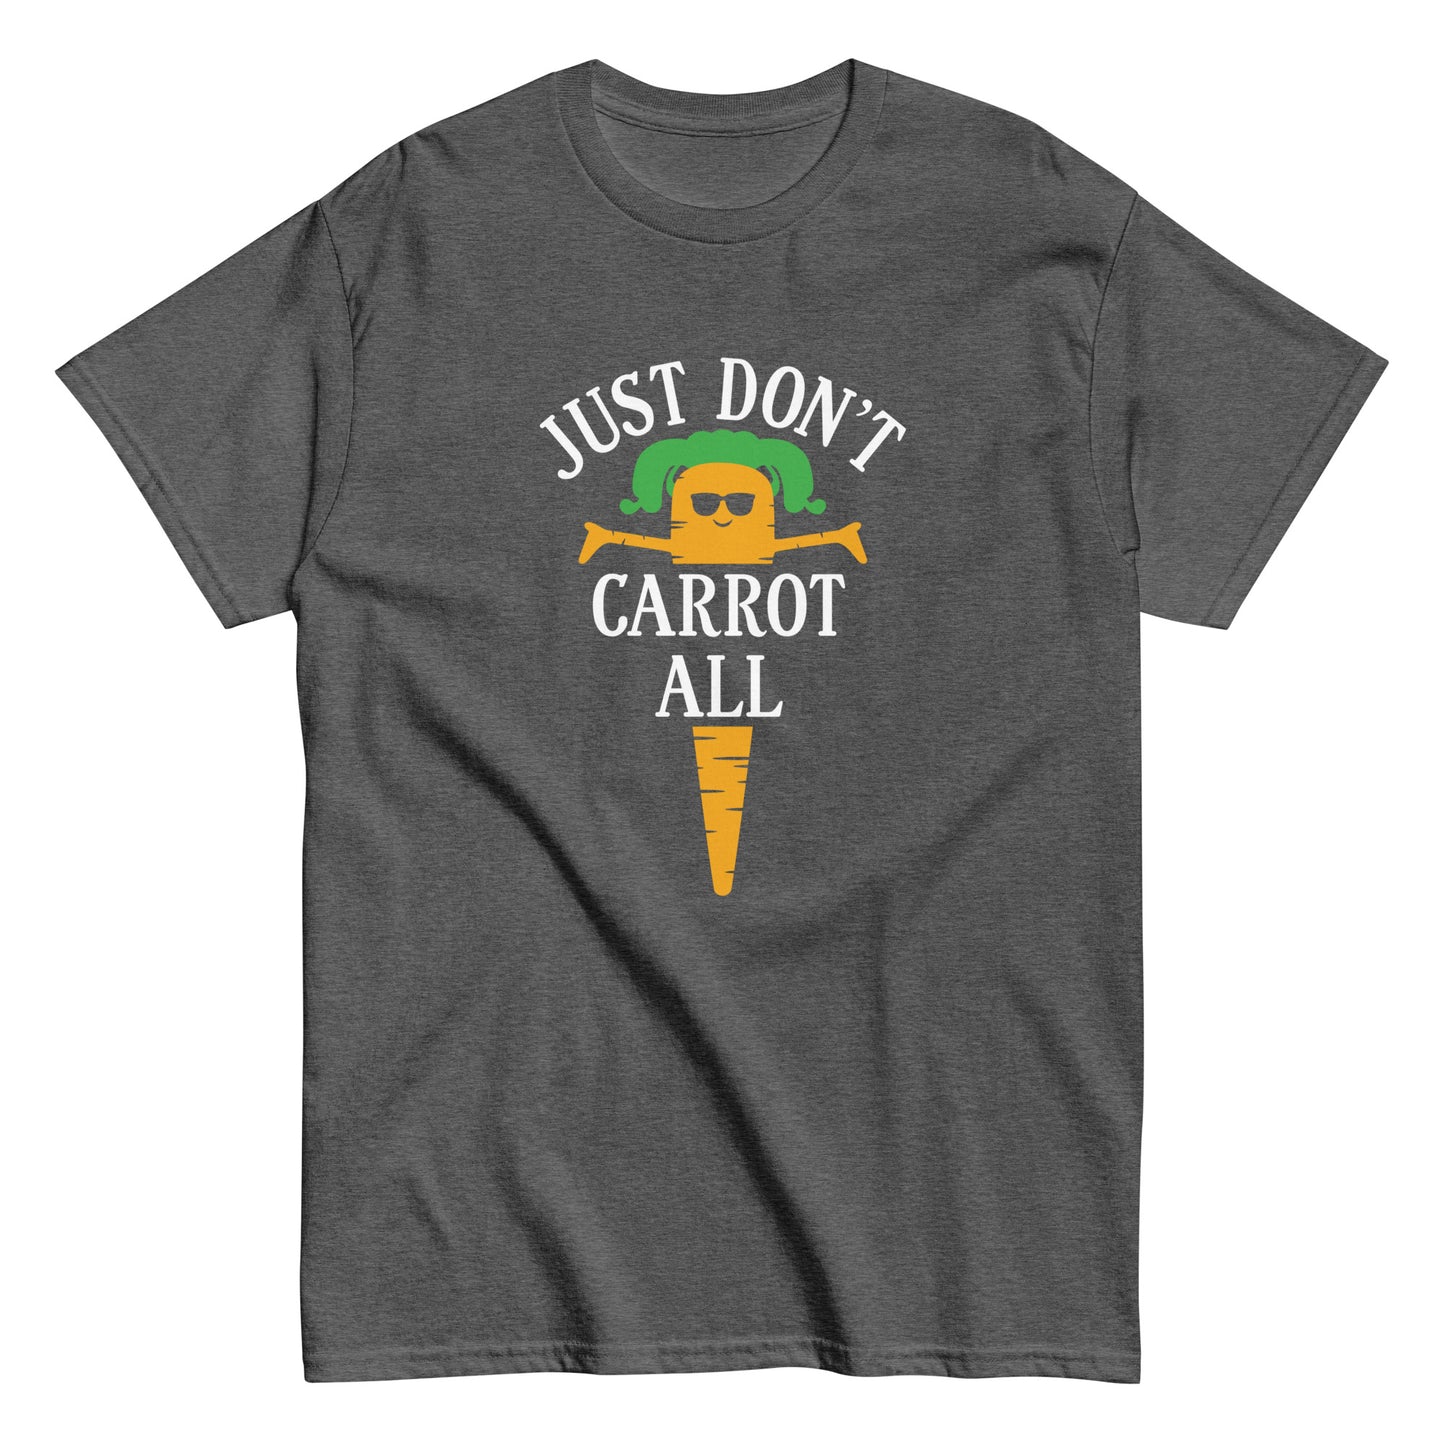 Just Don't Carrot All Men's Classic Tee